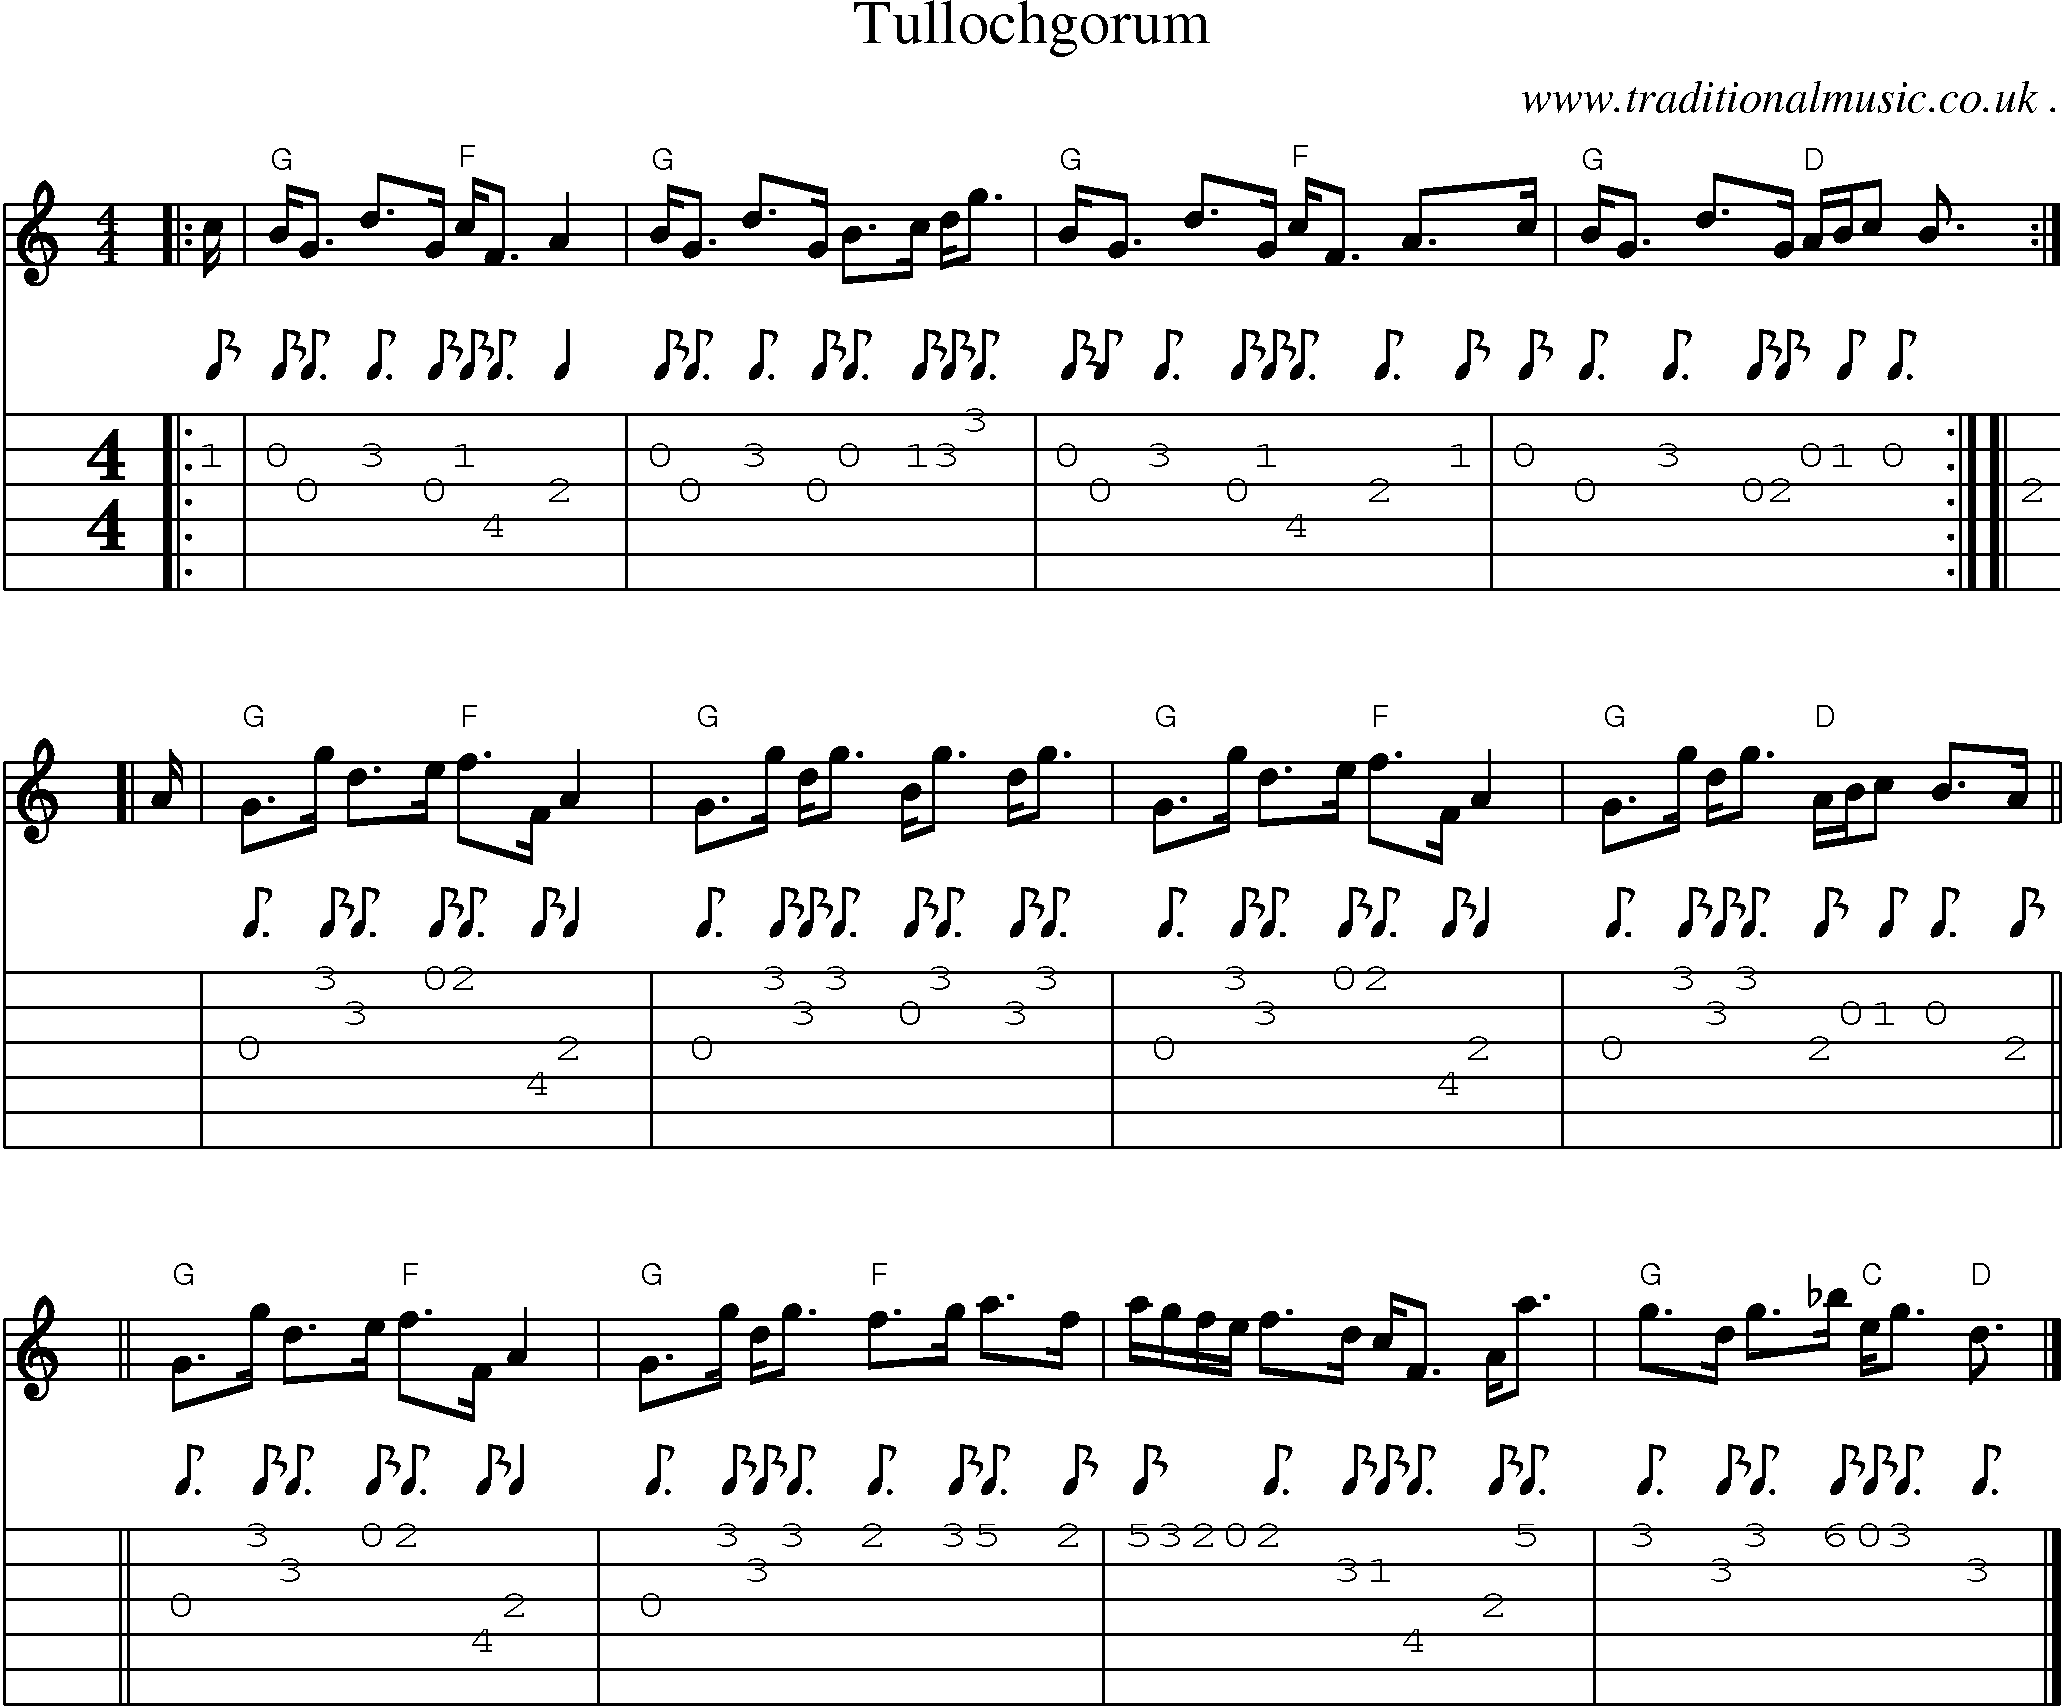 Sheet-music  score, Chords and Guitar Tabs for Tullochgorum